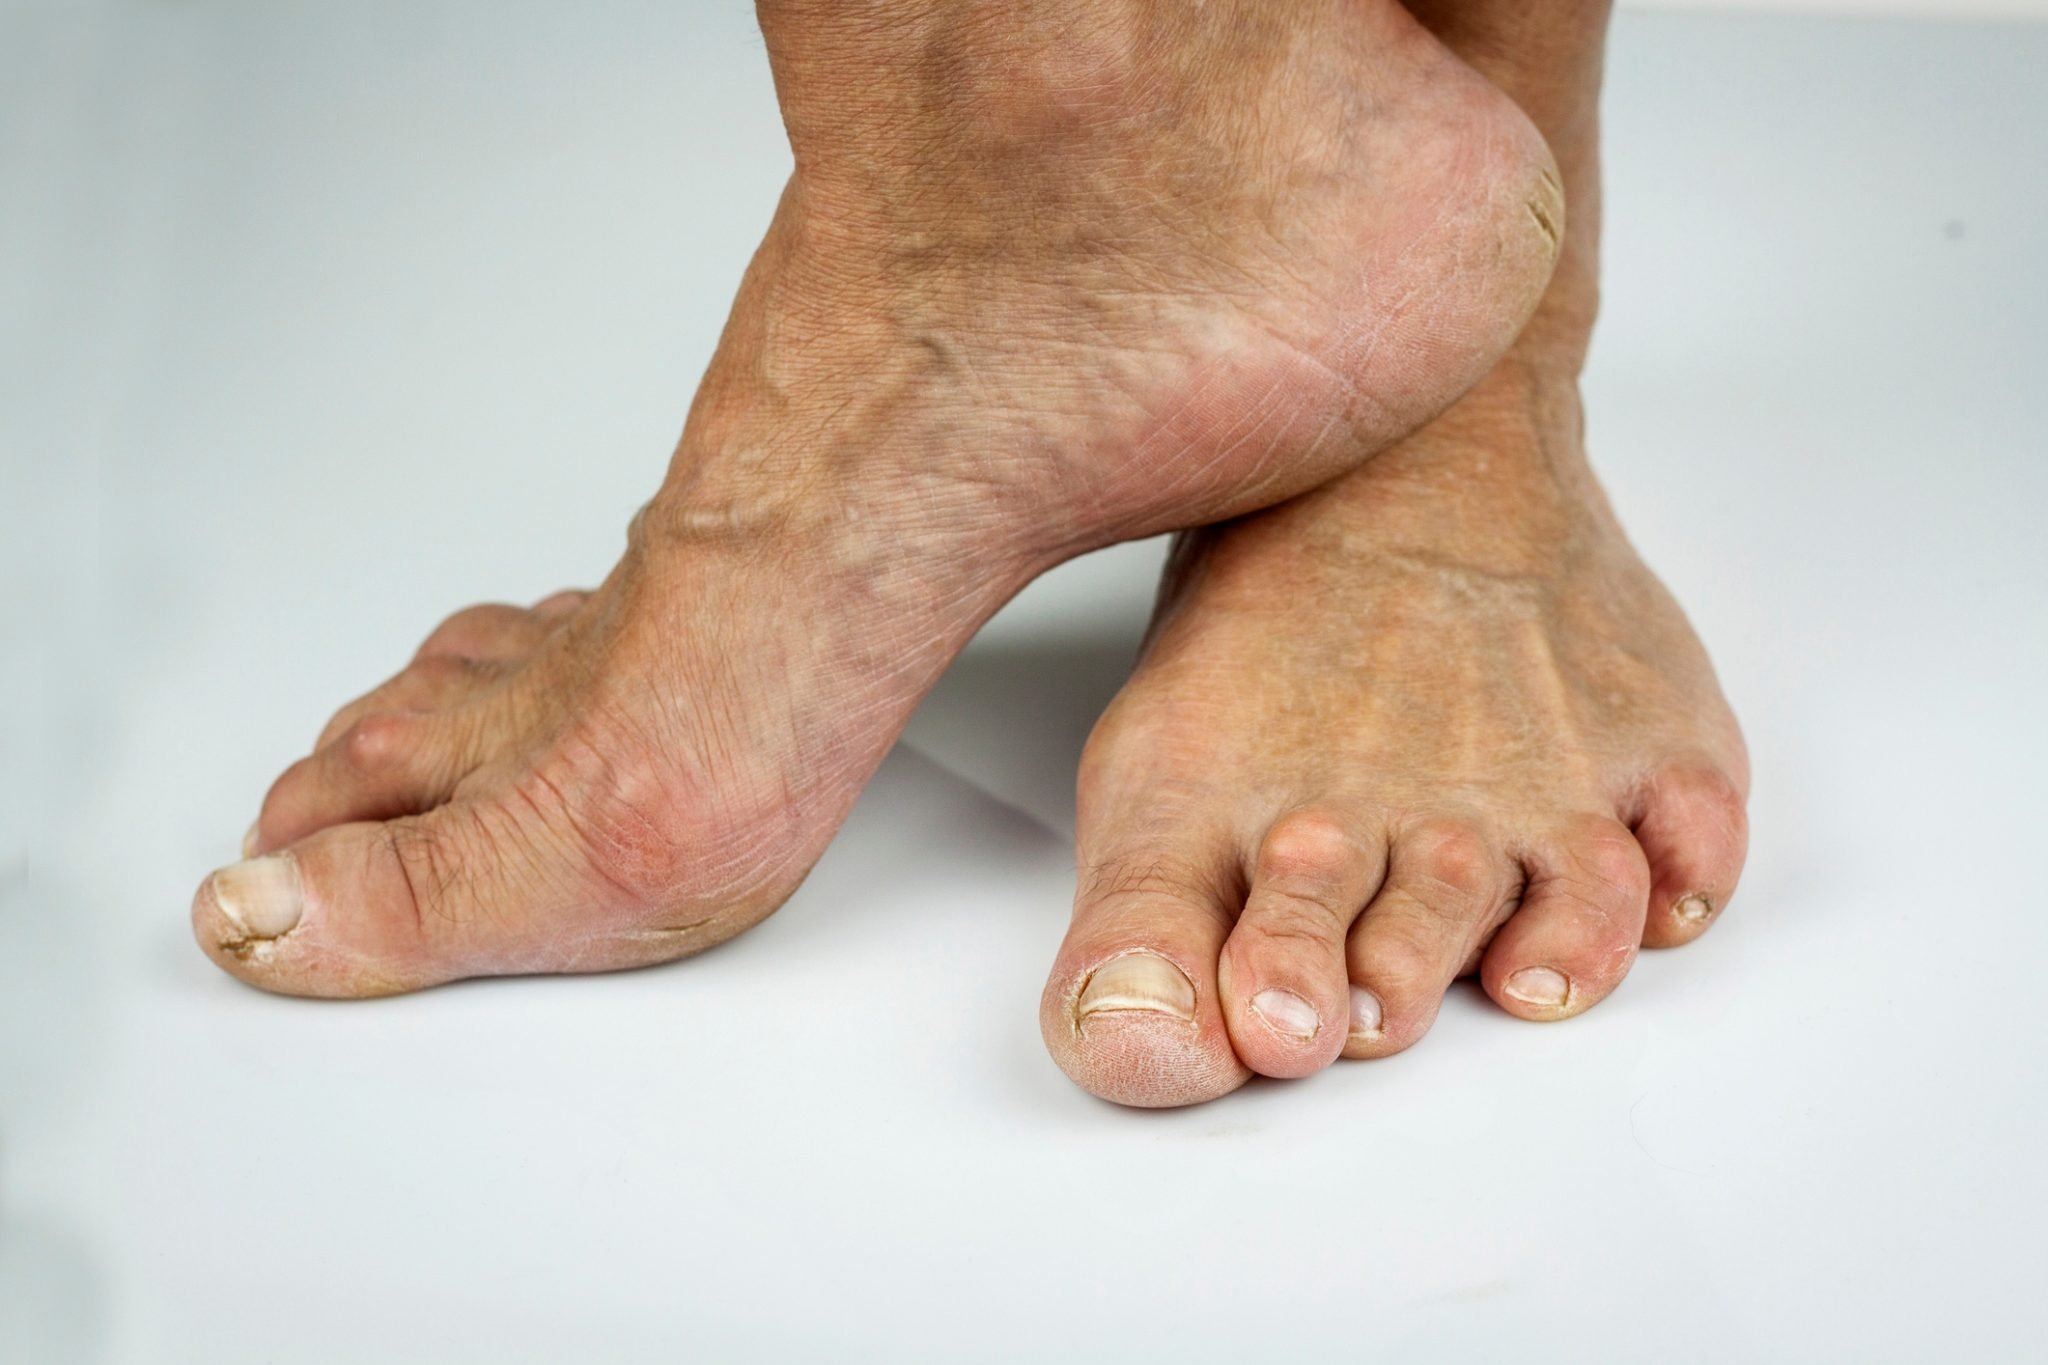 Foot Problems You May Experience as You Age